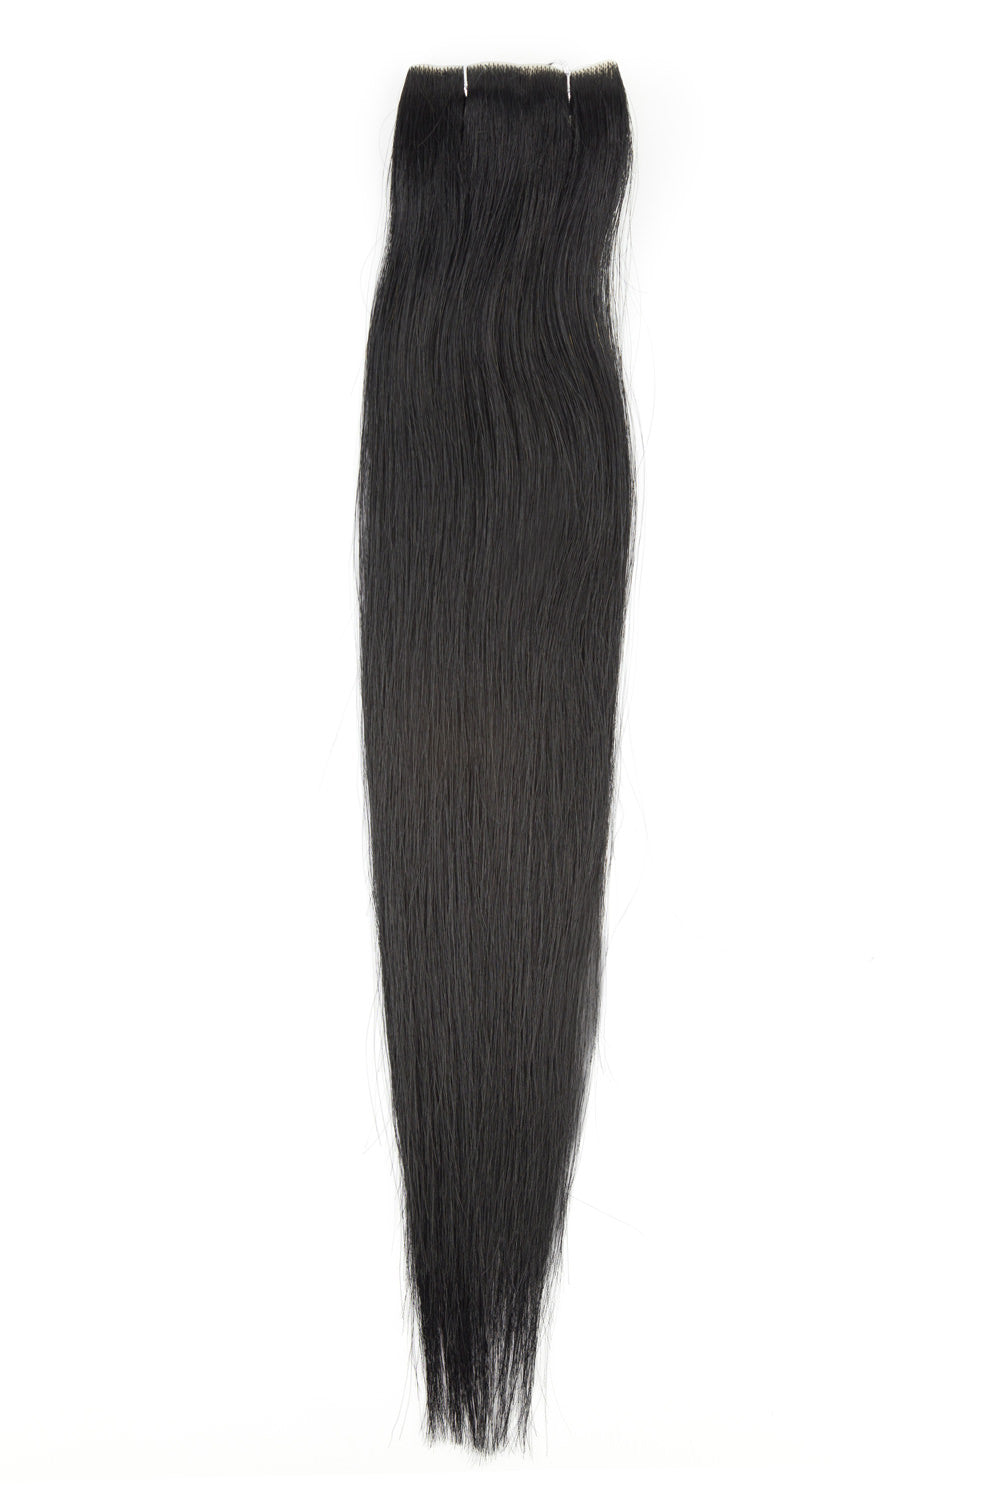 Hand-Tied Skin Weft with Clip-Ins